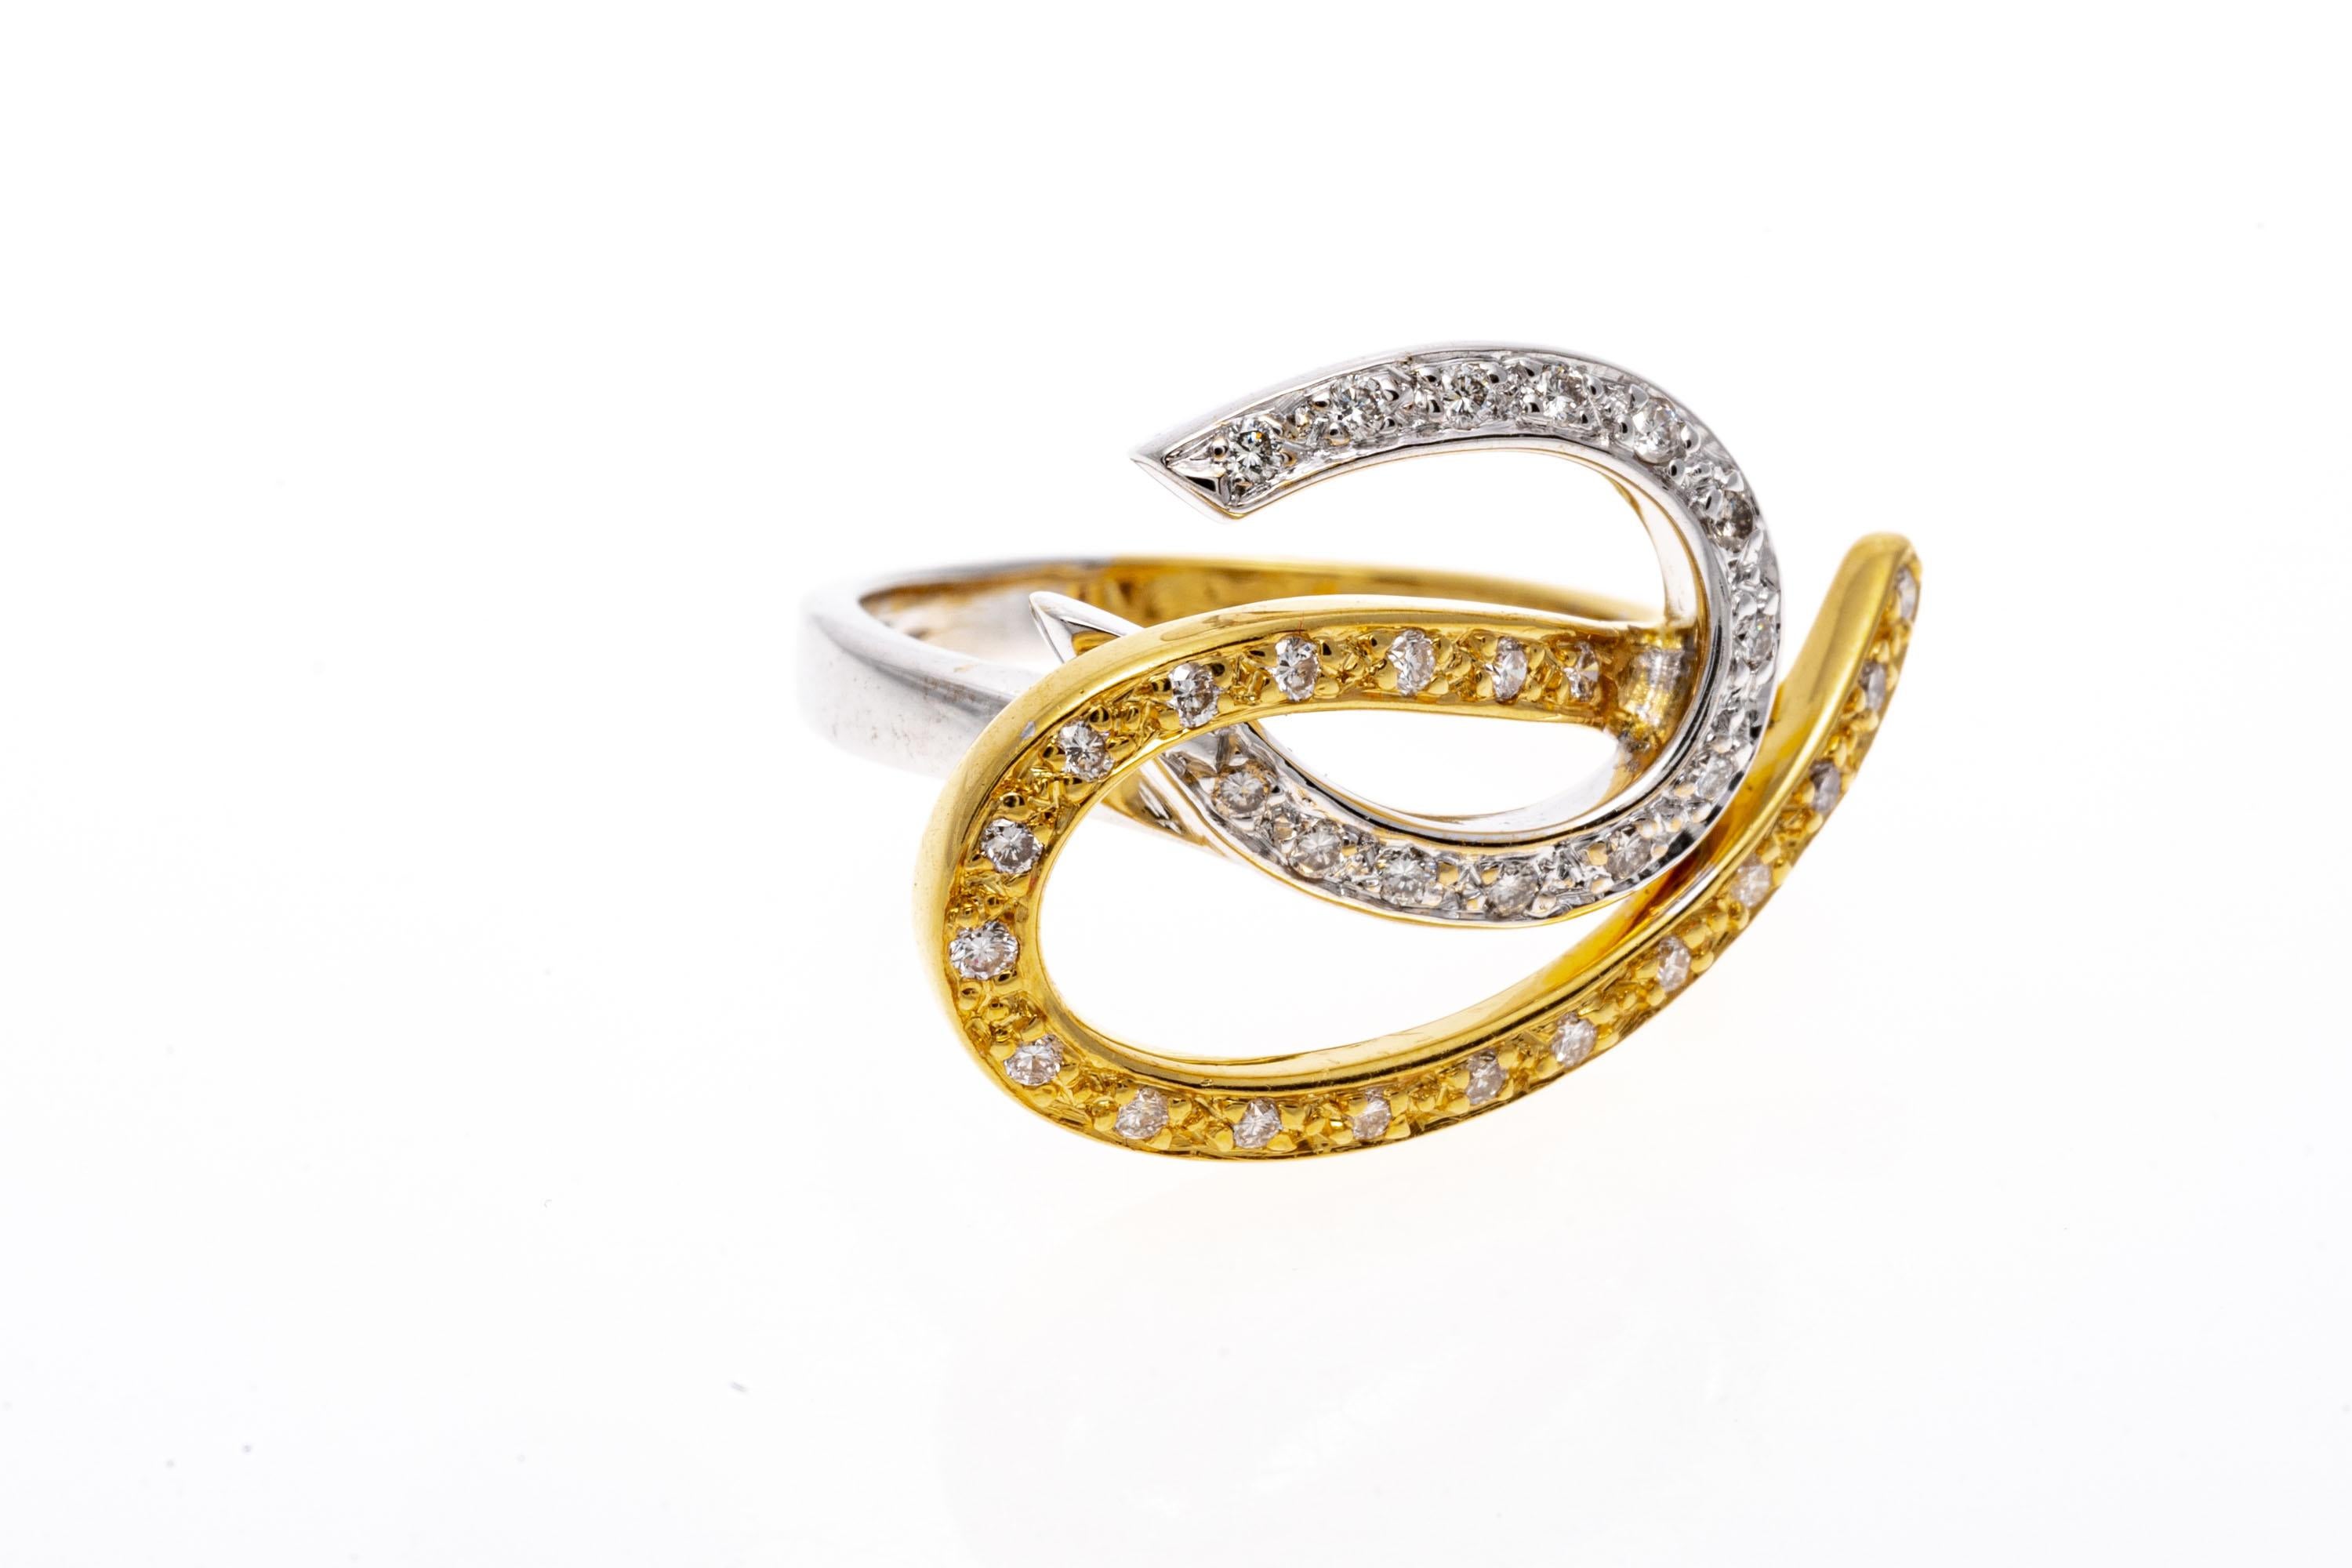 14k white gold and yellow vermeil ring. This lyrical looking ring is made up of a beautiful white gold swirl, and a graceful yellow vermeil swirl, set with round faceted diamonds, approximately 0.29 TCW.
Marks: None, tests 14k
Dimensions: 29/32